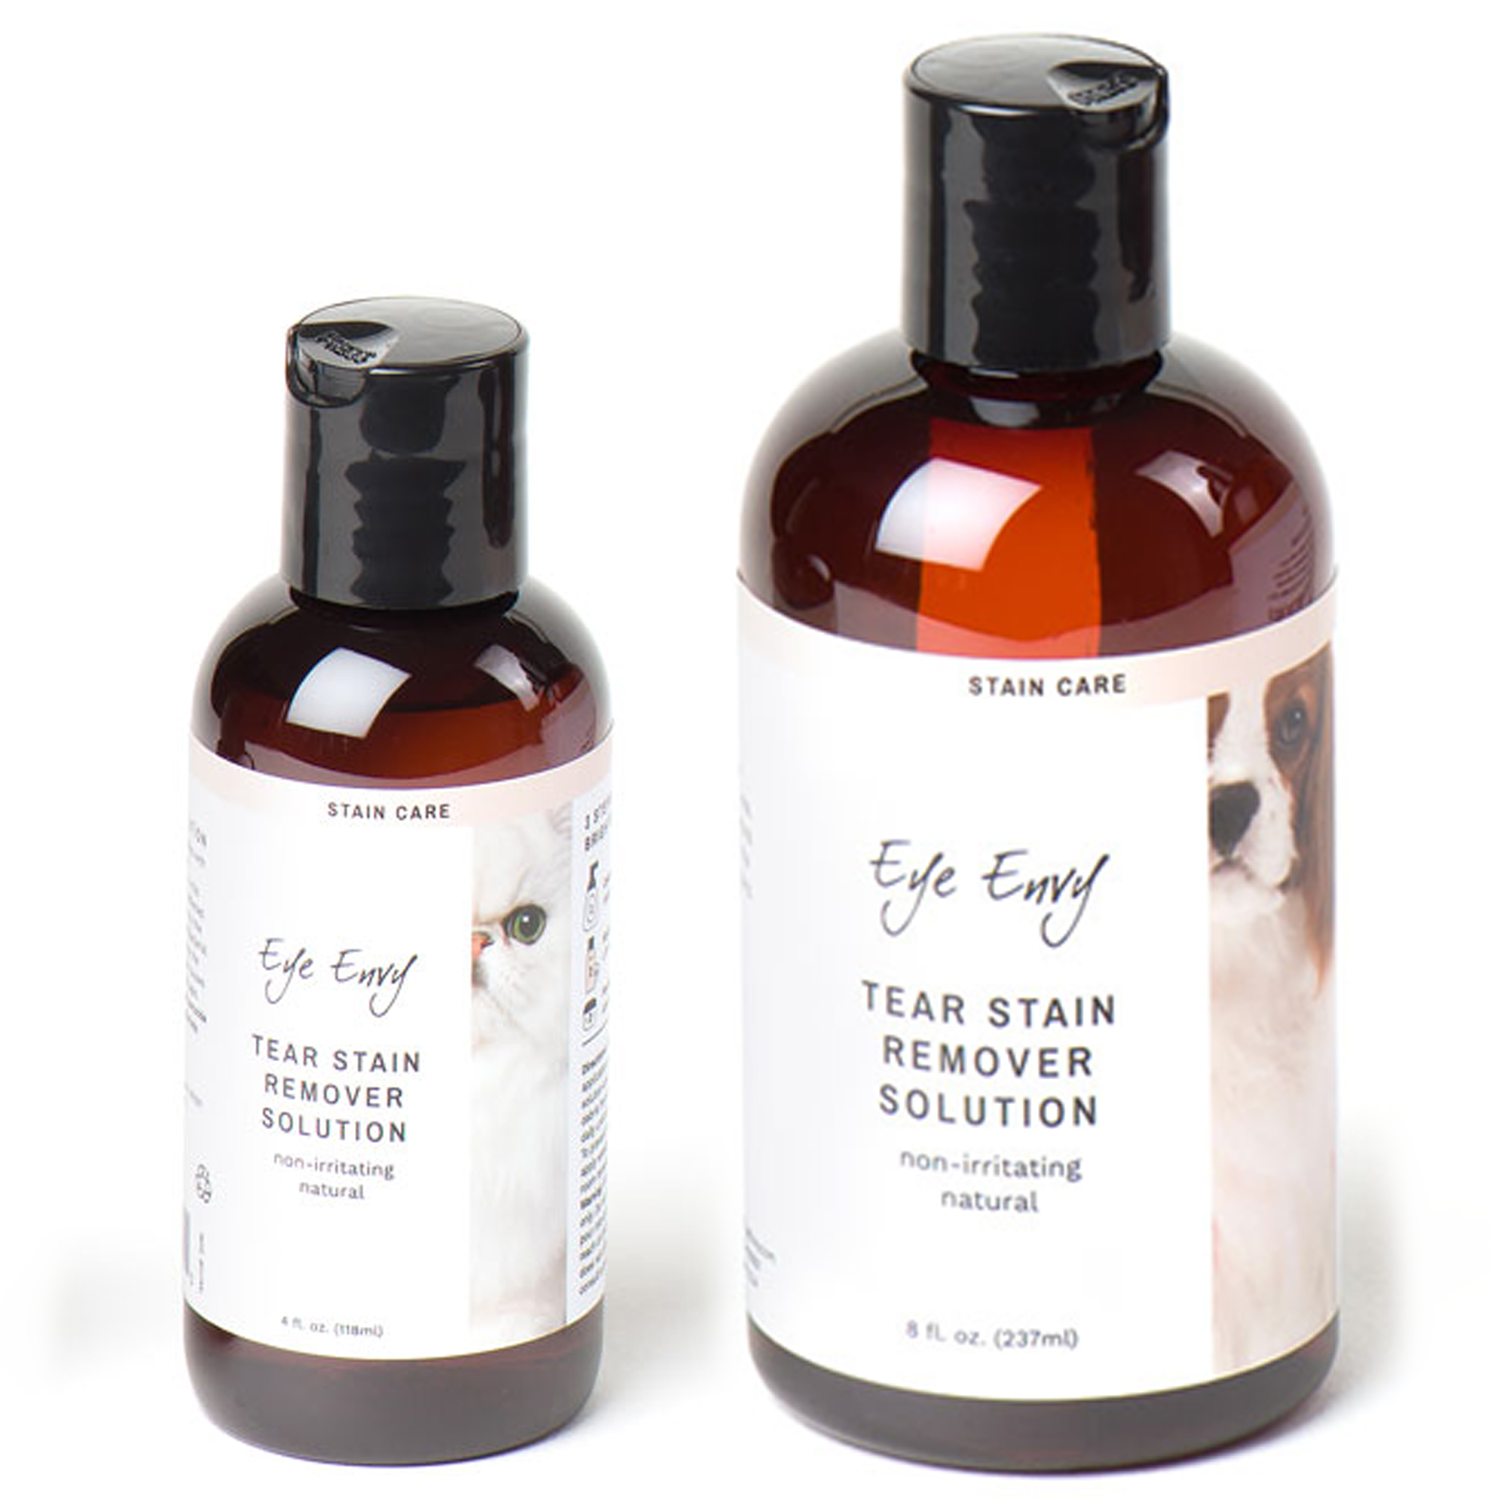 Pet Boutique - Dog Grooming - Eye Envy - Tear Stain Remover Solution